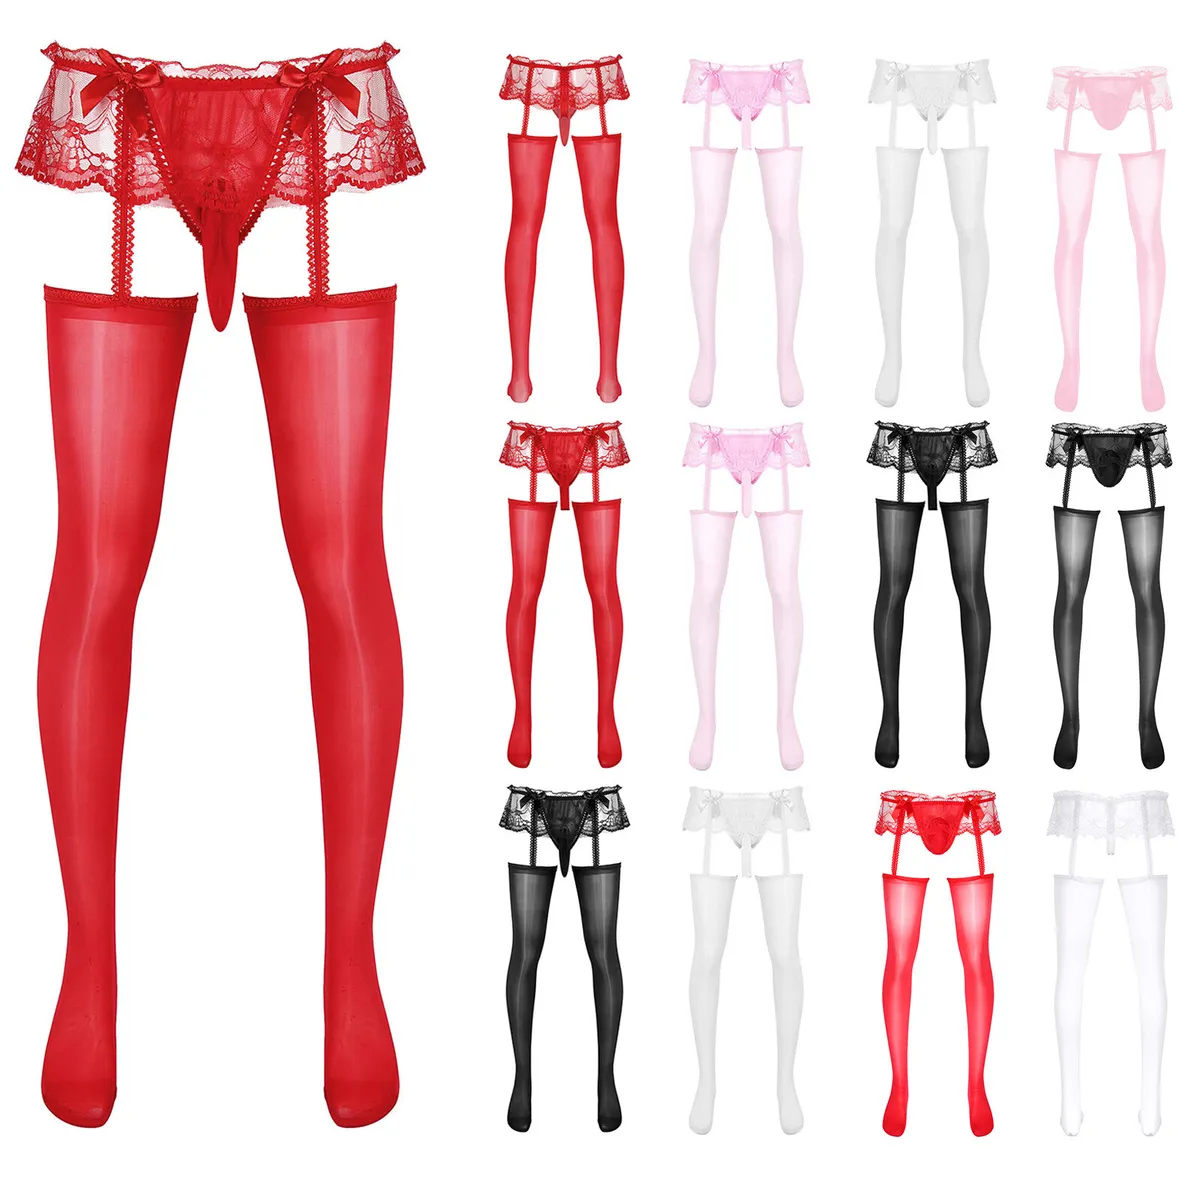 brian walczyk recommends thigh highs with garter belt pic